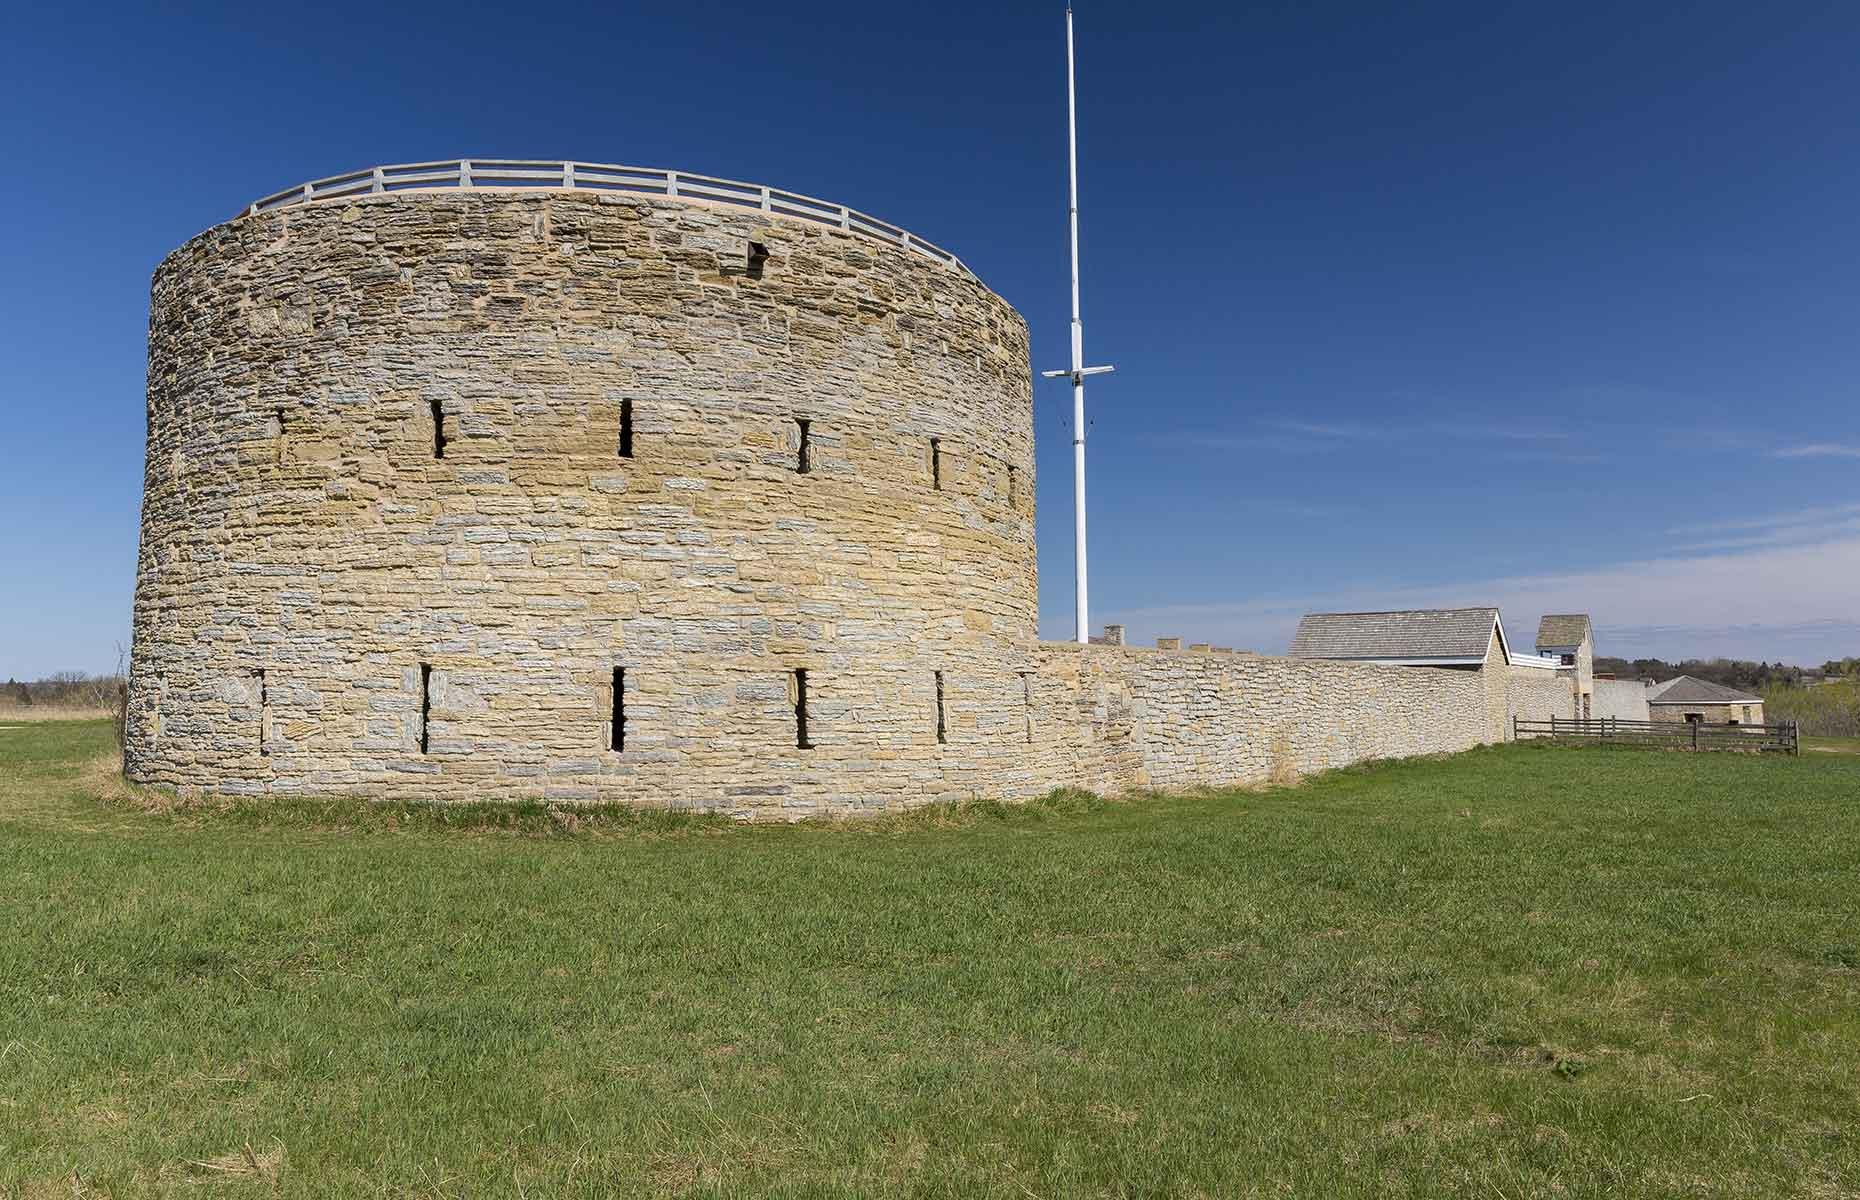 <p>In Minnesota, there are preserved burial mounds dating as far back as 3000 BC in Mille Lacs Kathio State Park, but the Round Tower at <a href="https://www.mnhs.org/fortsnelling">Fort Snelling</a> is likelier to command your attention. Originally called Fort St Anthony, this stone fortress was built between 1820 and 1825 and was practically impregnable, with musket slits that allowed defenders to fire at enemies. Today, you can learn about the site at the restored Plank Museum & Visitor Center.</p>